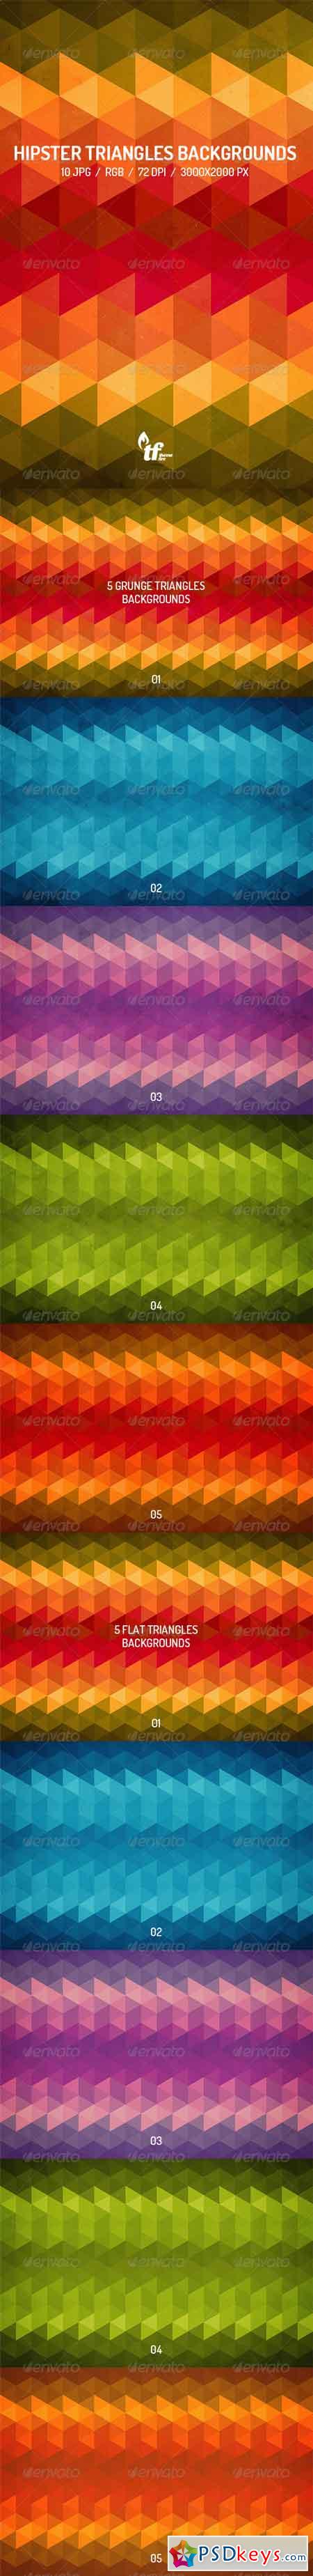 Hipster Triangles Backgrounds 7796833